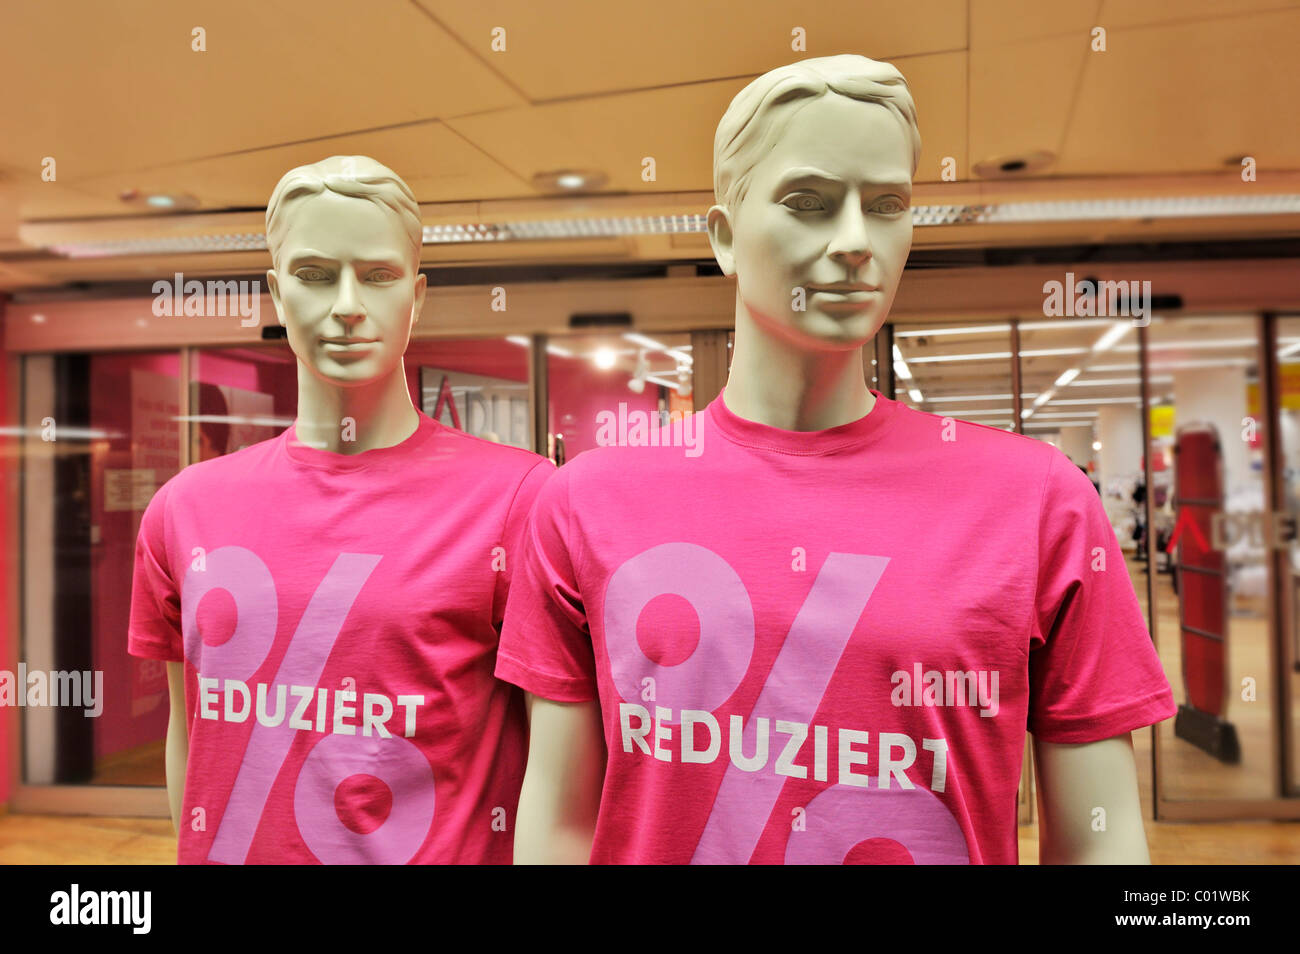 Male mannequins wearing T-shirts labelled reduziert, German for reduced, Munich, Bavaria, Germany, Europe Stock Photo